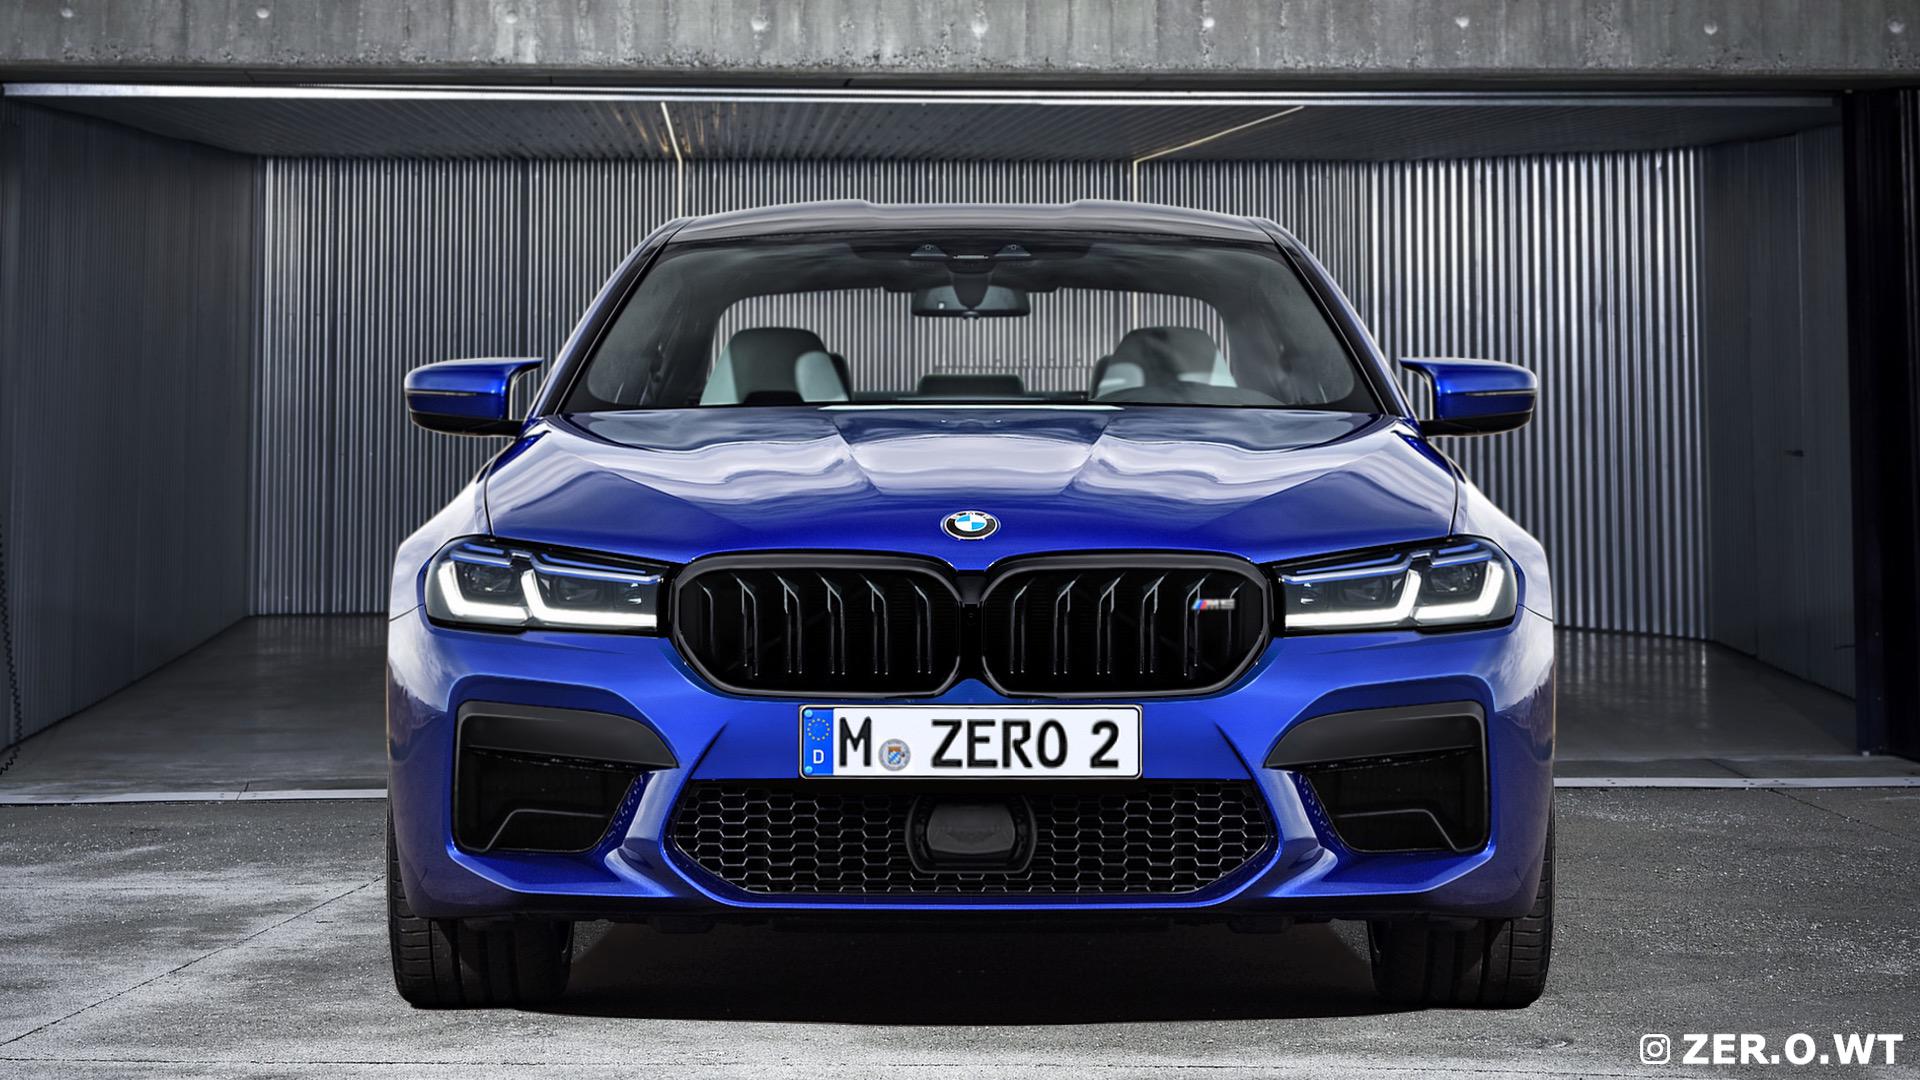 2021 BMW M5 Facelift: Renders show the front and rear of the F90 LCI